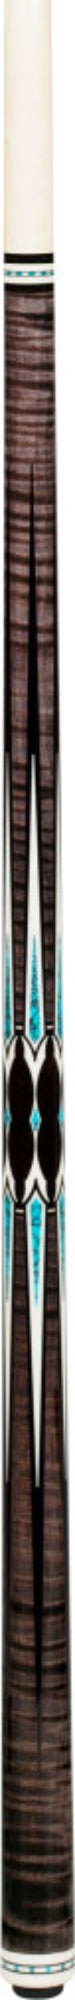 Pechauer PL-21 Limited Edition Pool Cue